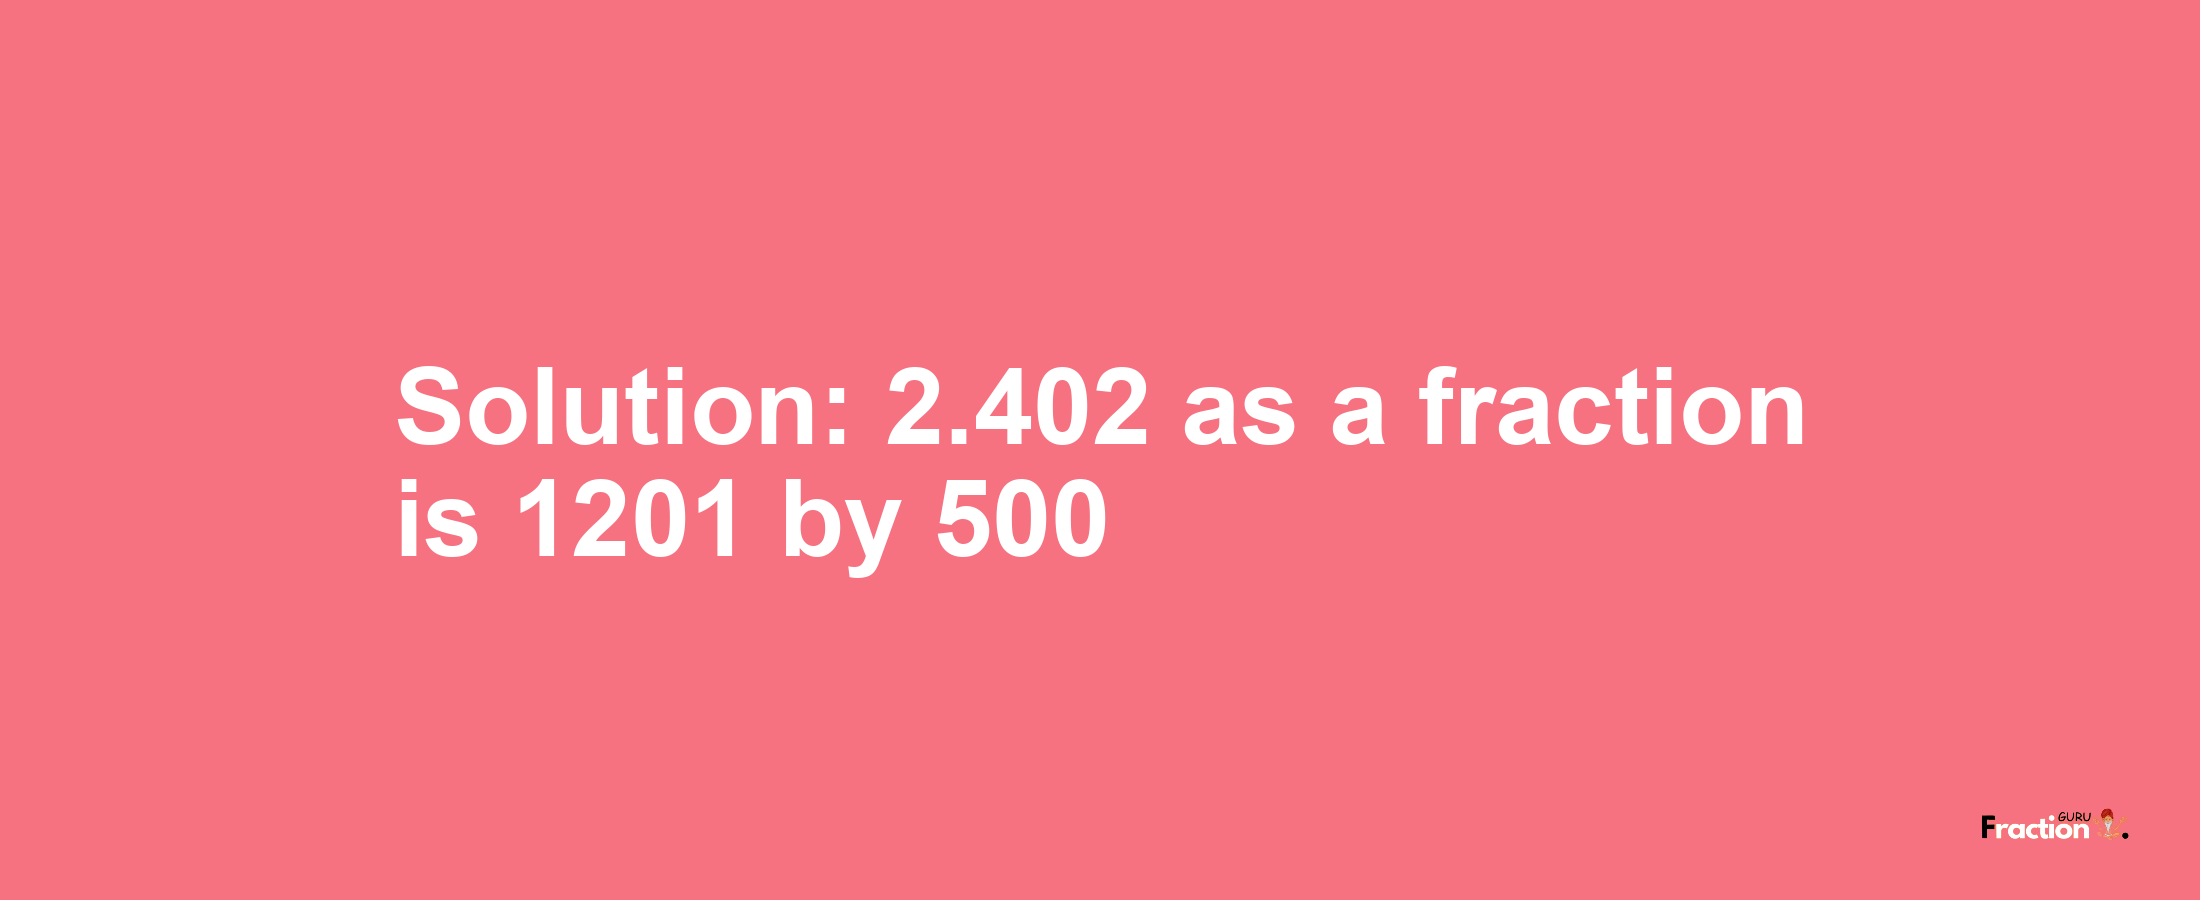 Solution:2.402 as a fraction is 1201/500